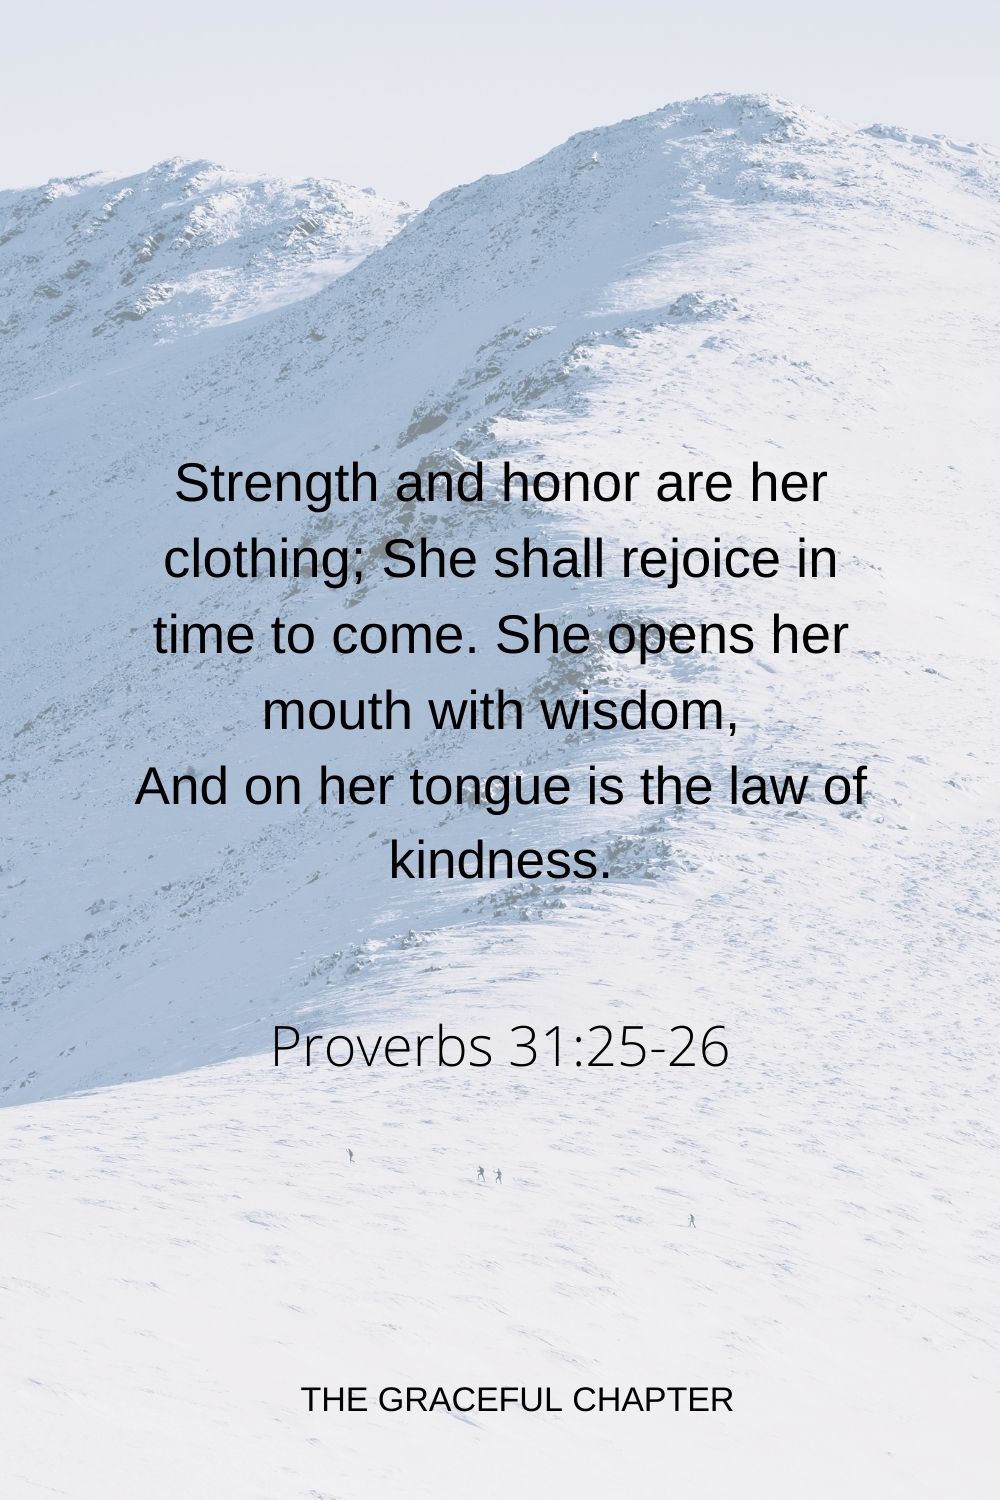 Strength and honor are her clothing; She shall rejoice in time to come. She opens her mouth with wisdom, And on her tongue is the law of kindness. Proverbs 31:25-26